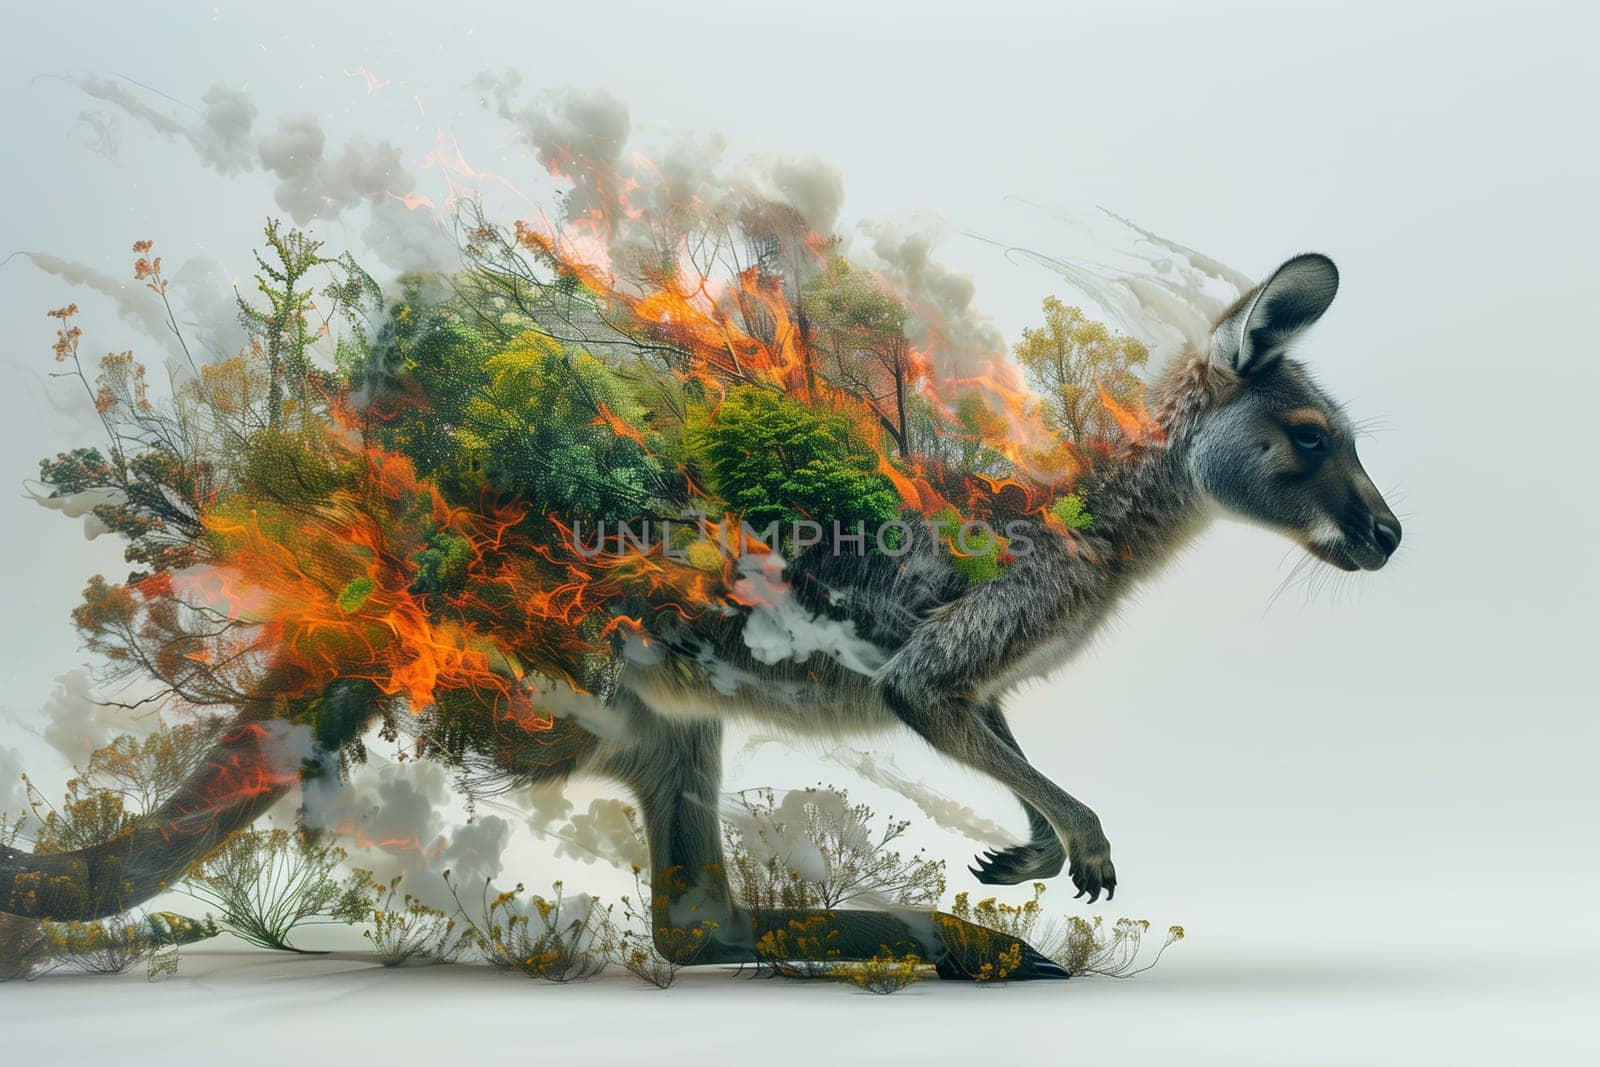 A painting depicting a kangaroo running with fire erupting from its back in a forest setting, symbolizing danger and ecological threats.